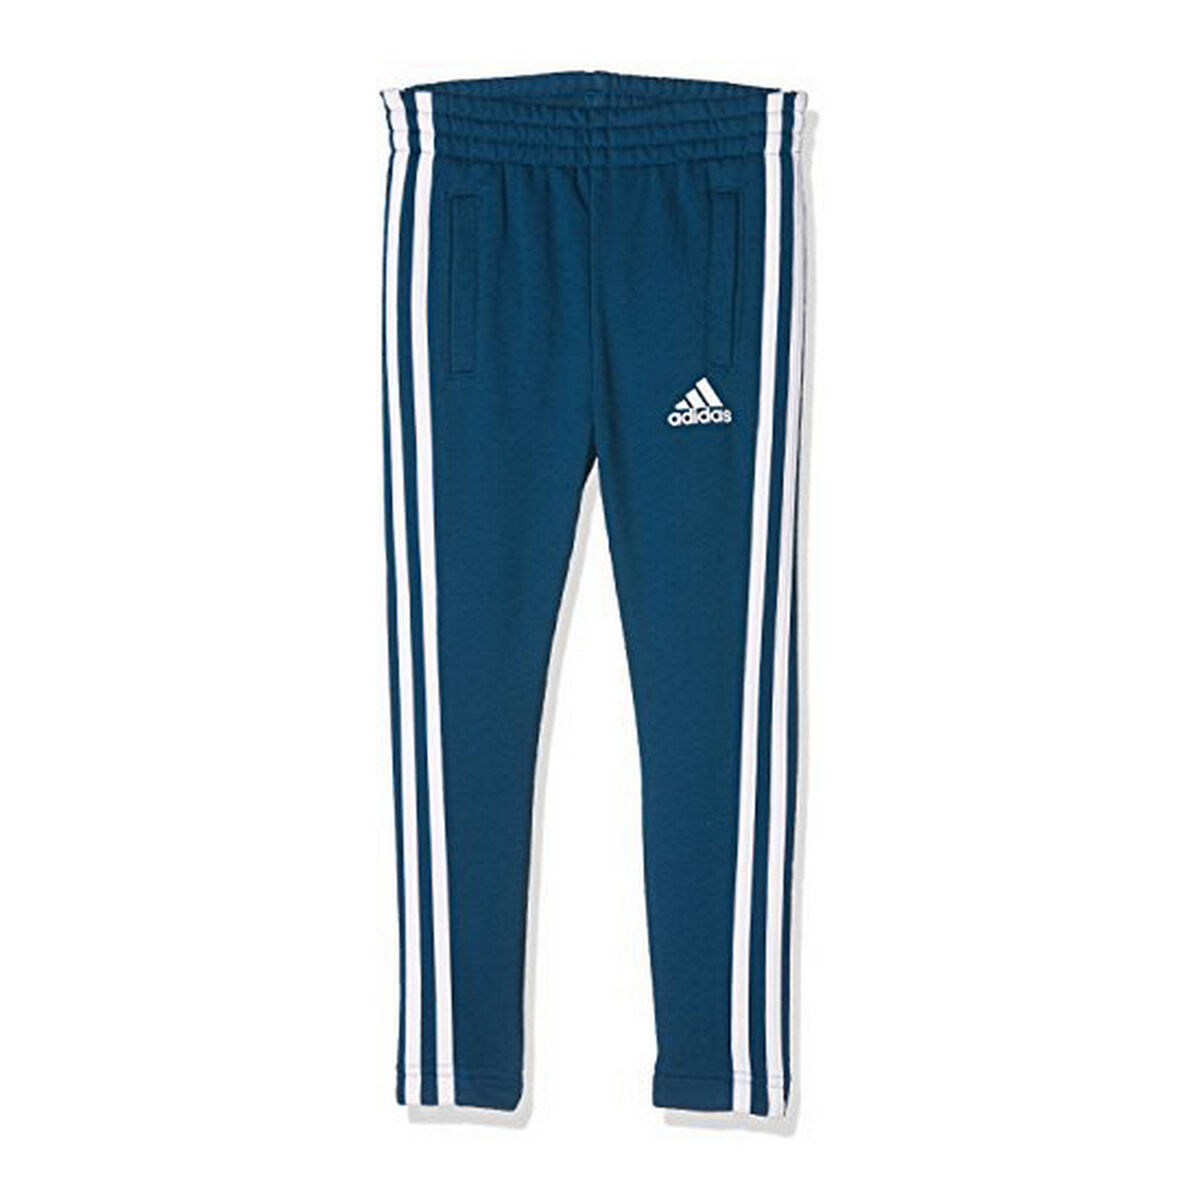 Children's Tracksuit Bottoms Adidas  YB 3S FT PANT CF2617 Blue 10 Years